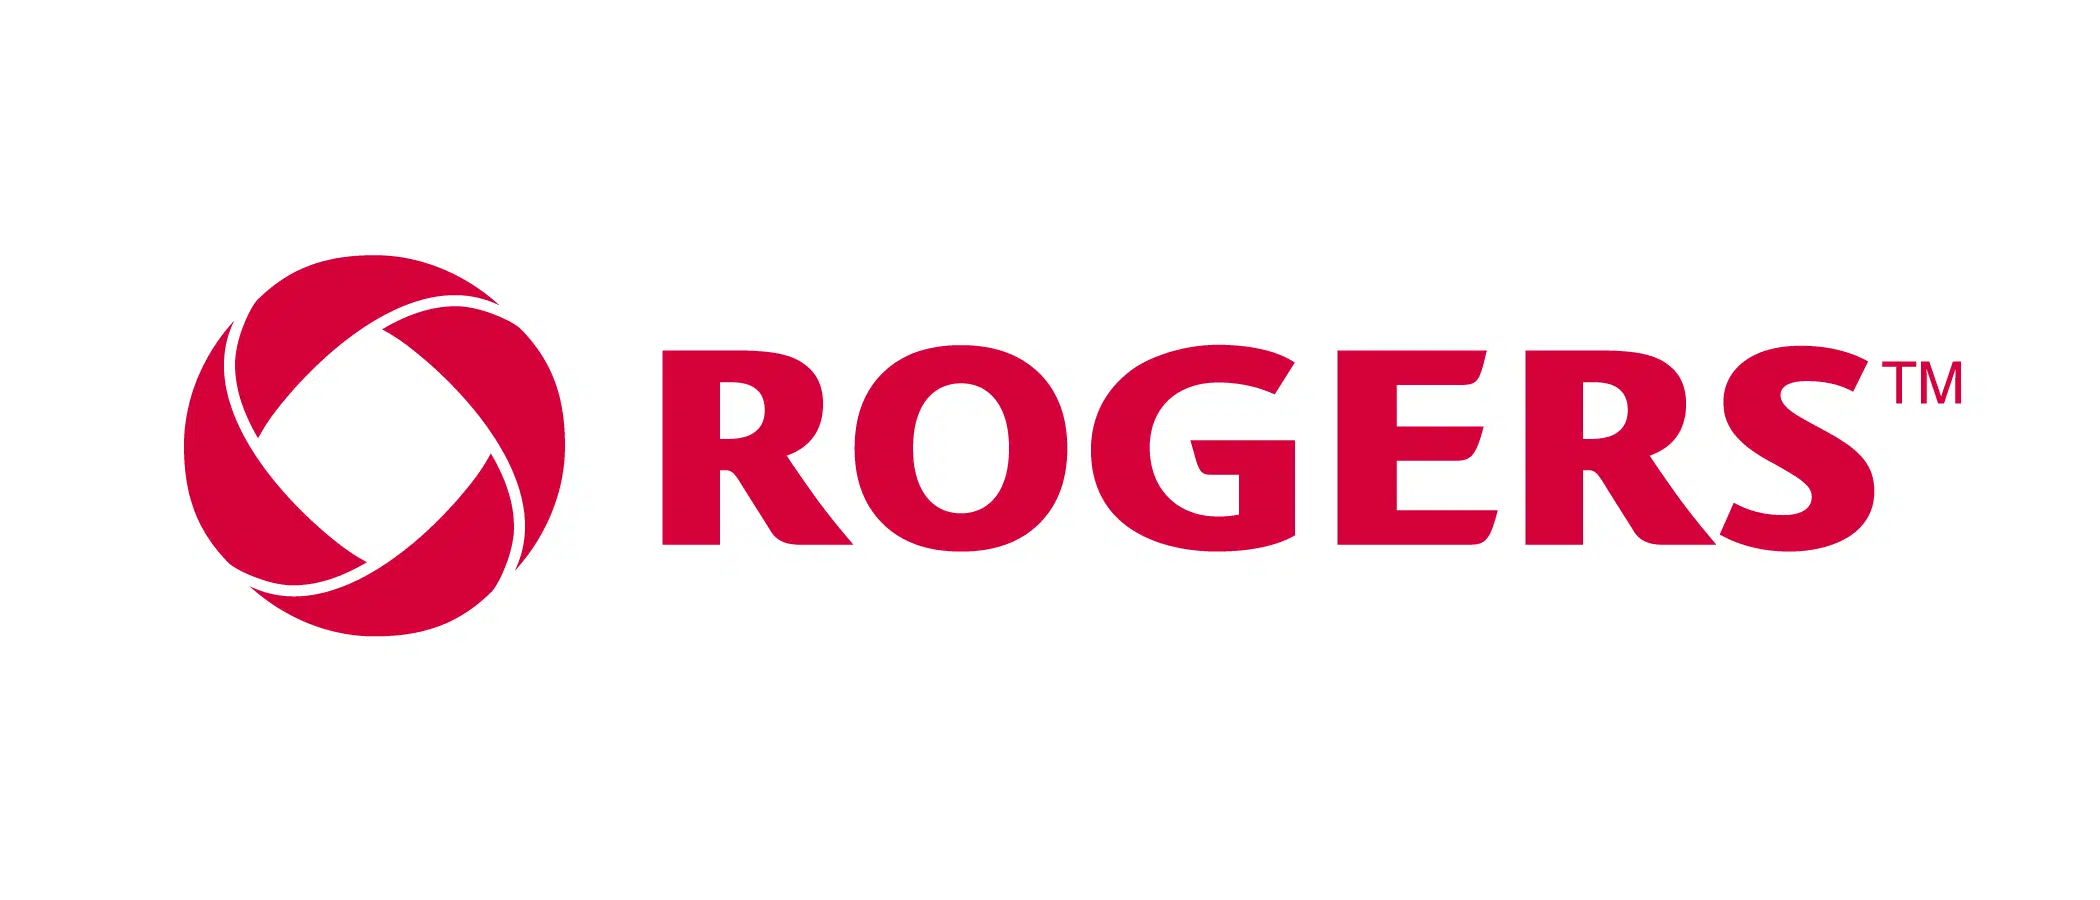 Rogers upgrading internet and TV services in Quinte Region